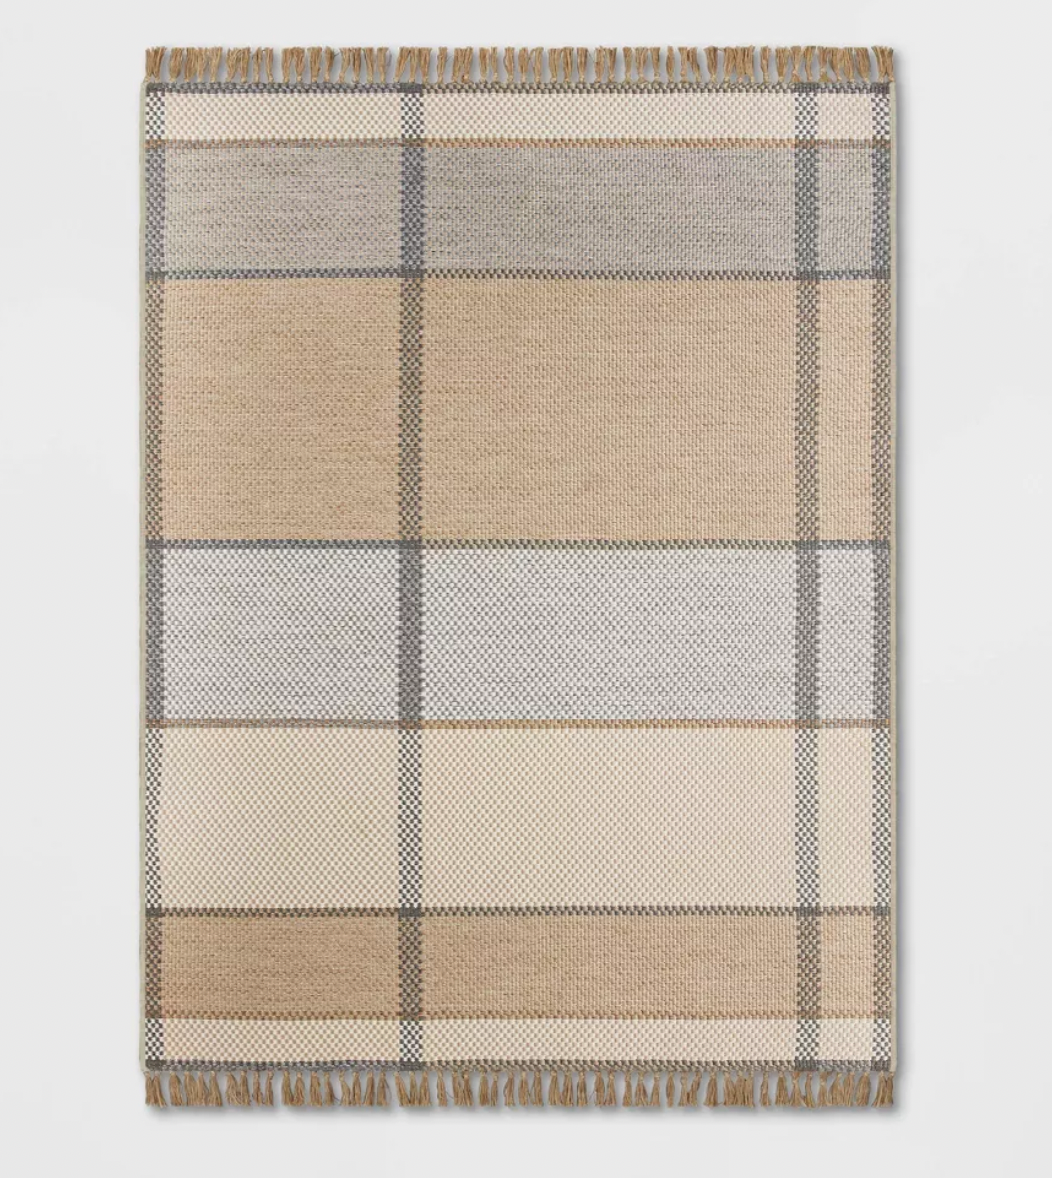 5' x 7' Oversized Plaid Outdoor Rug- Gray